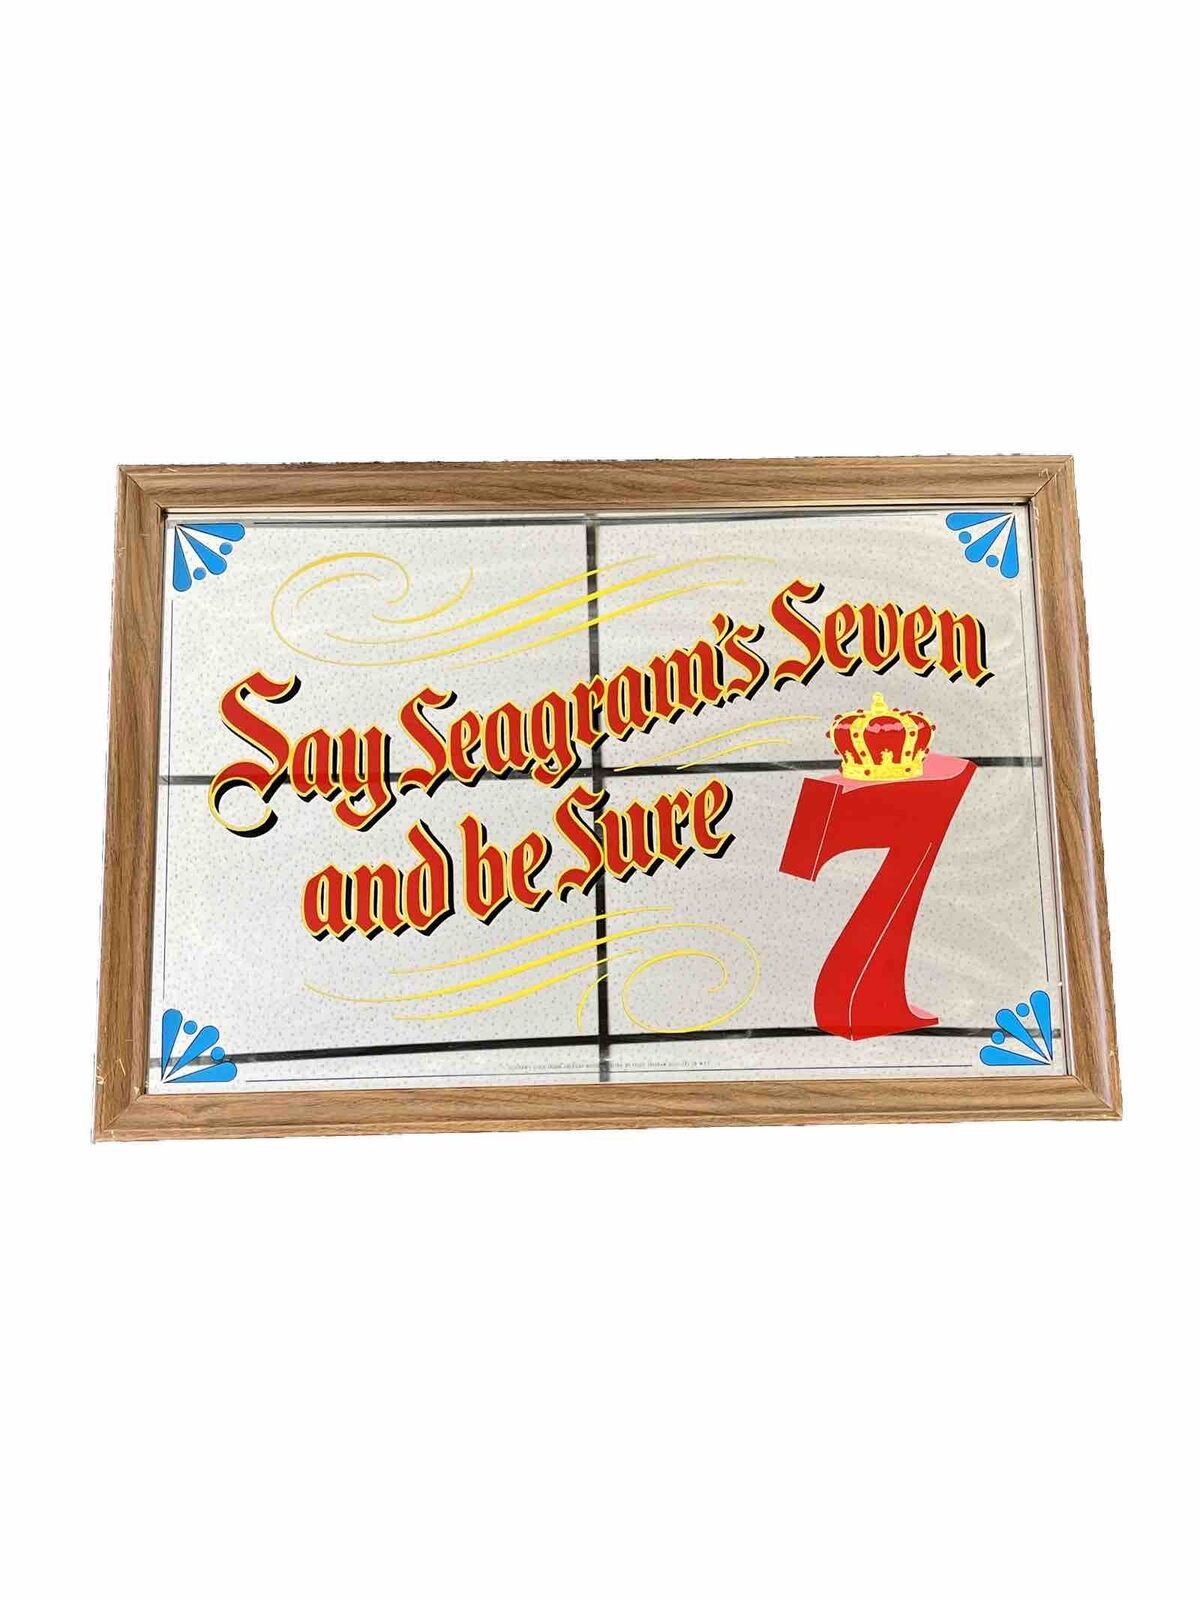 Say Segram\'s Seven and be Sure Mirror 26\